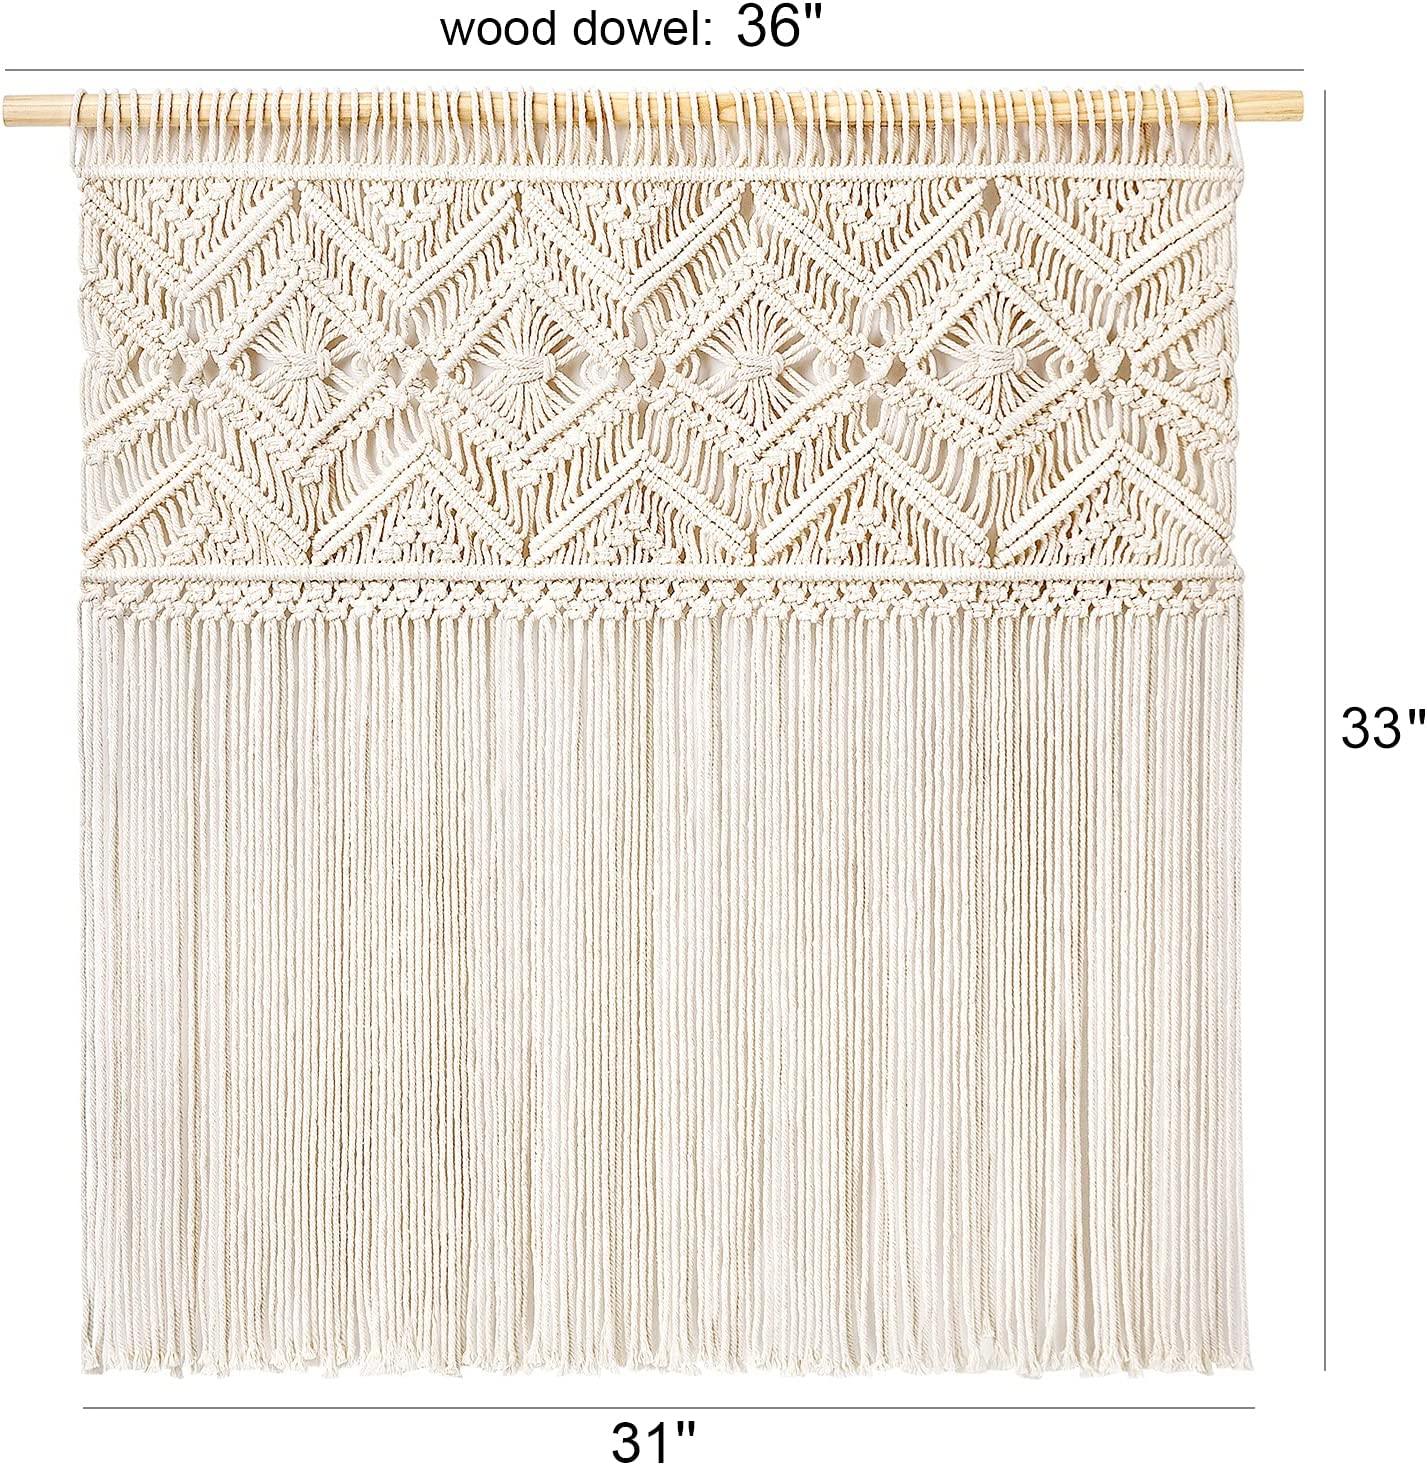 Large Macrame Wall Hanging Boho Decor Tapestry Fringe Wall Art Headboard Woven Home Decoration - Decotree.co Online Shop